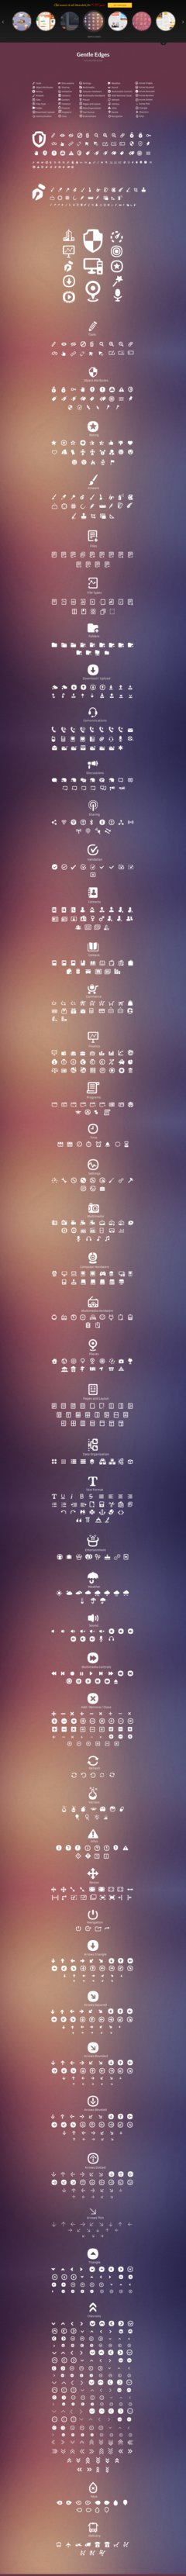 gentle_edges__1000_vector_icons__by_sand